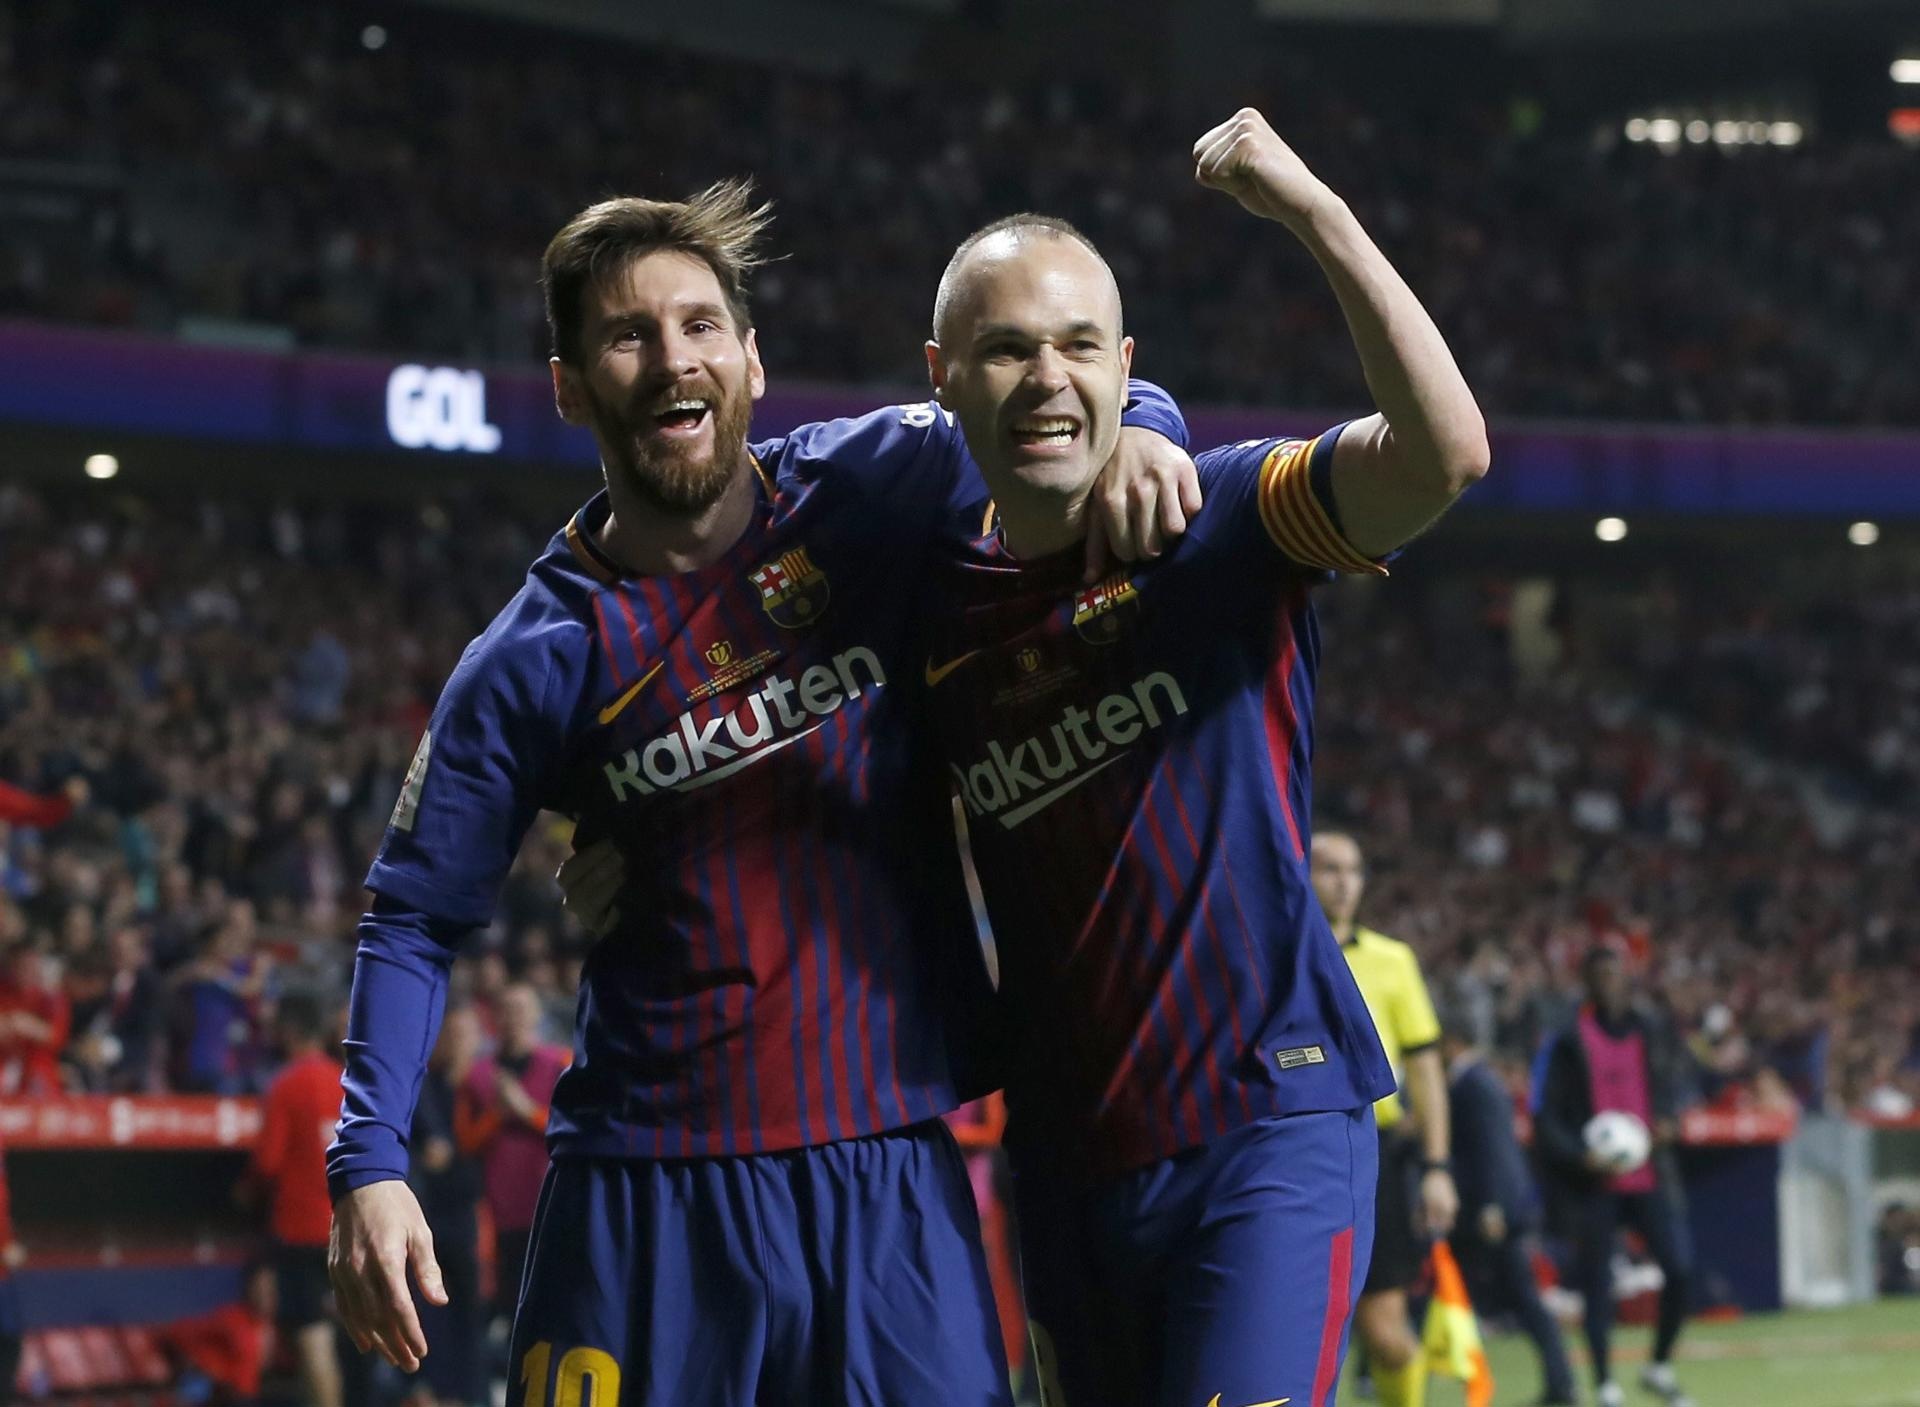 Iniesta expects 'a great game' against Barcelona